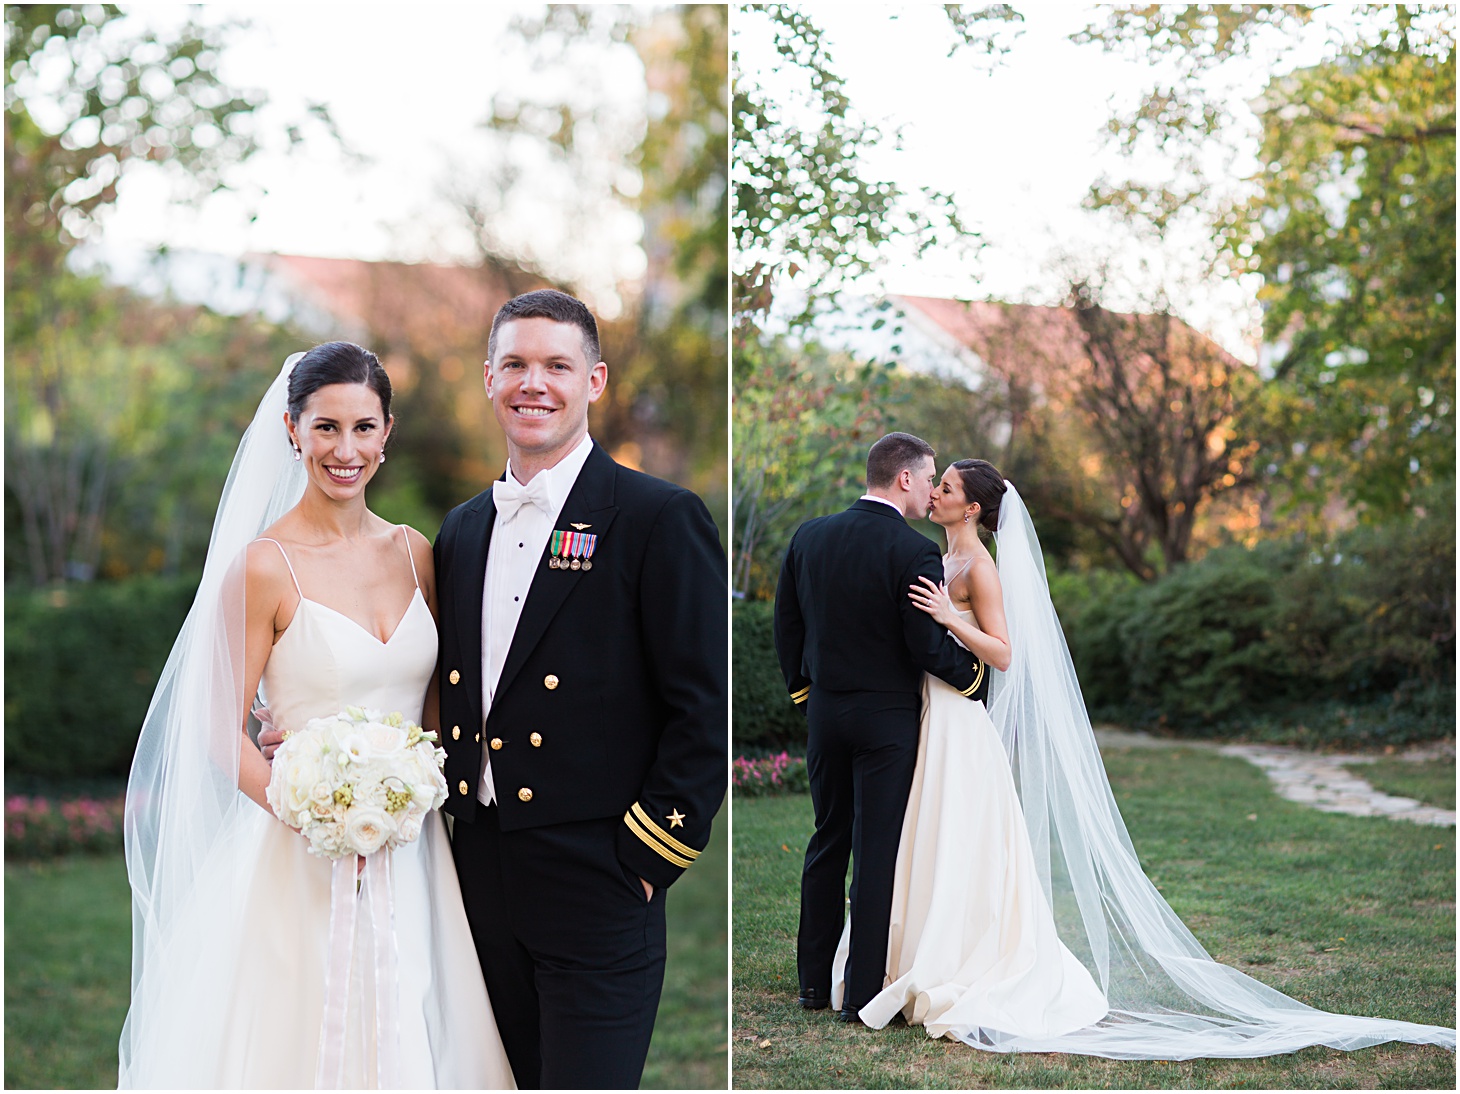 Classic bride & groom portraits - A Thoroughly Washingtonian Wedding at Meridian House in DC by Sarah Bradshaw 